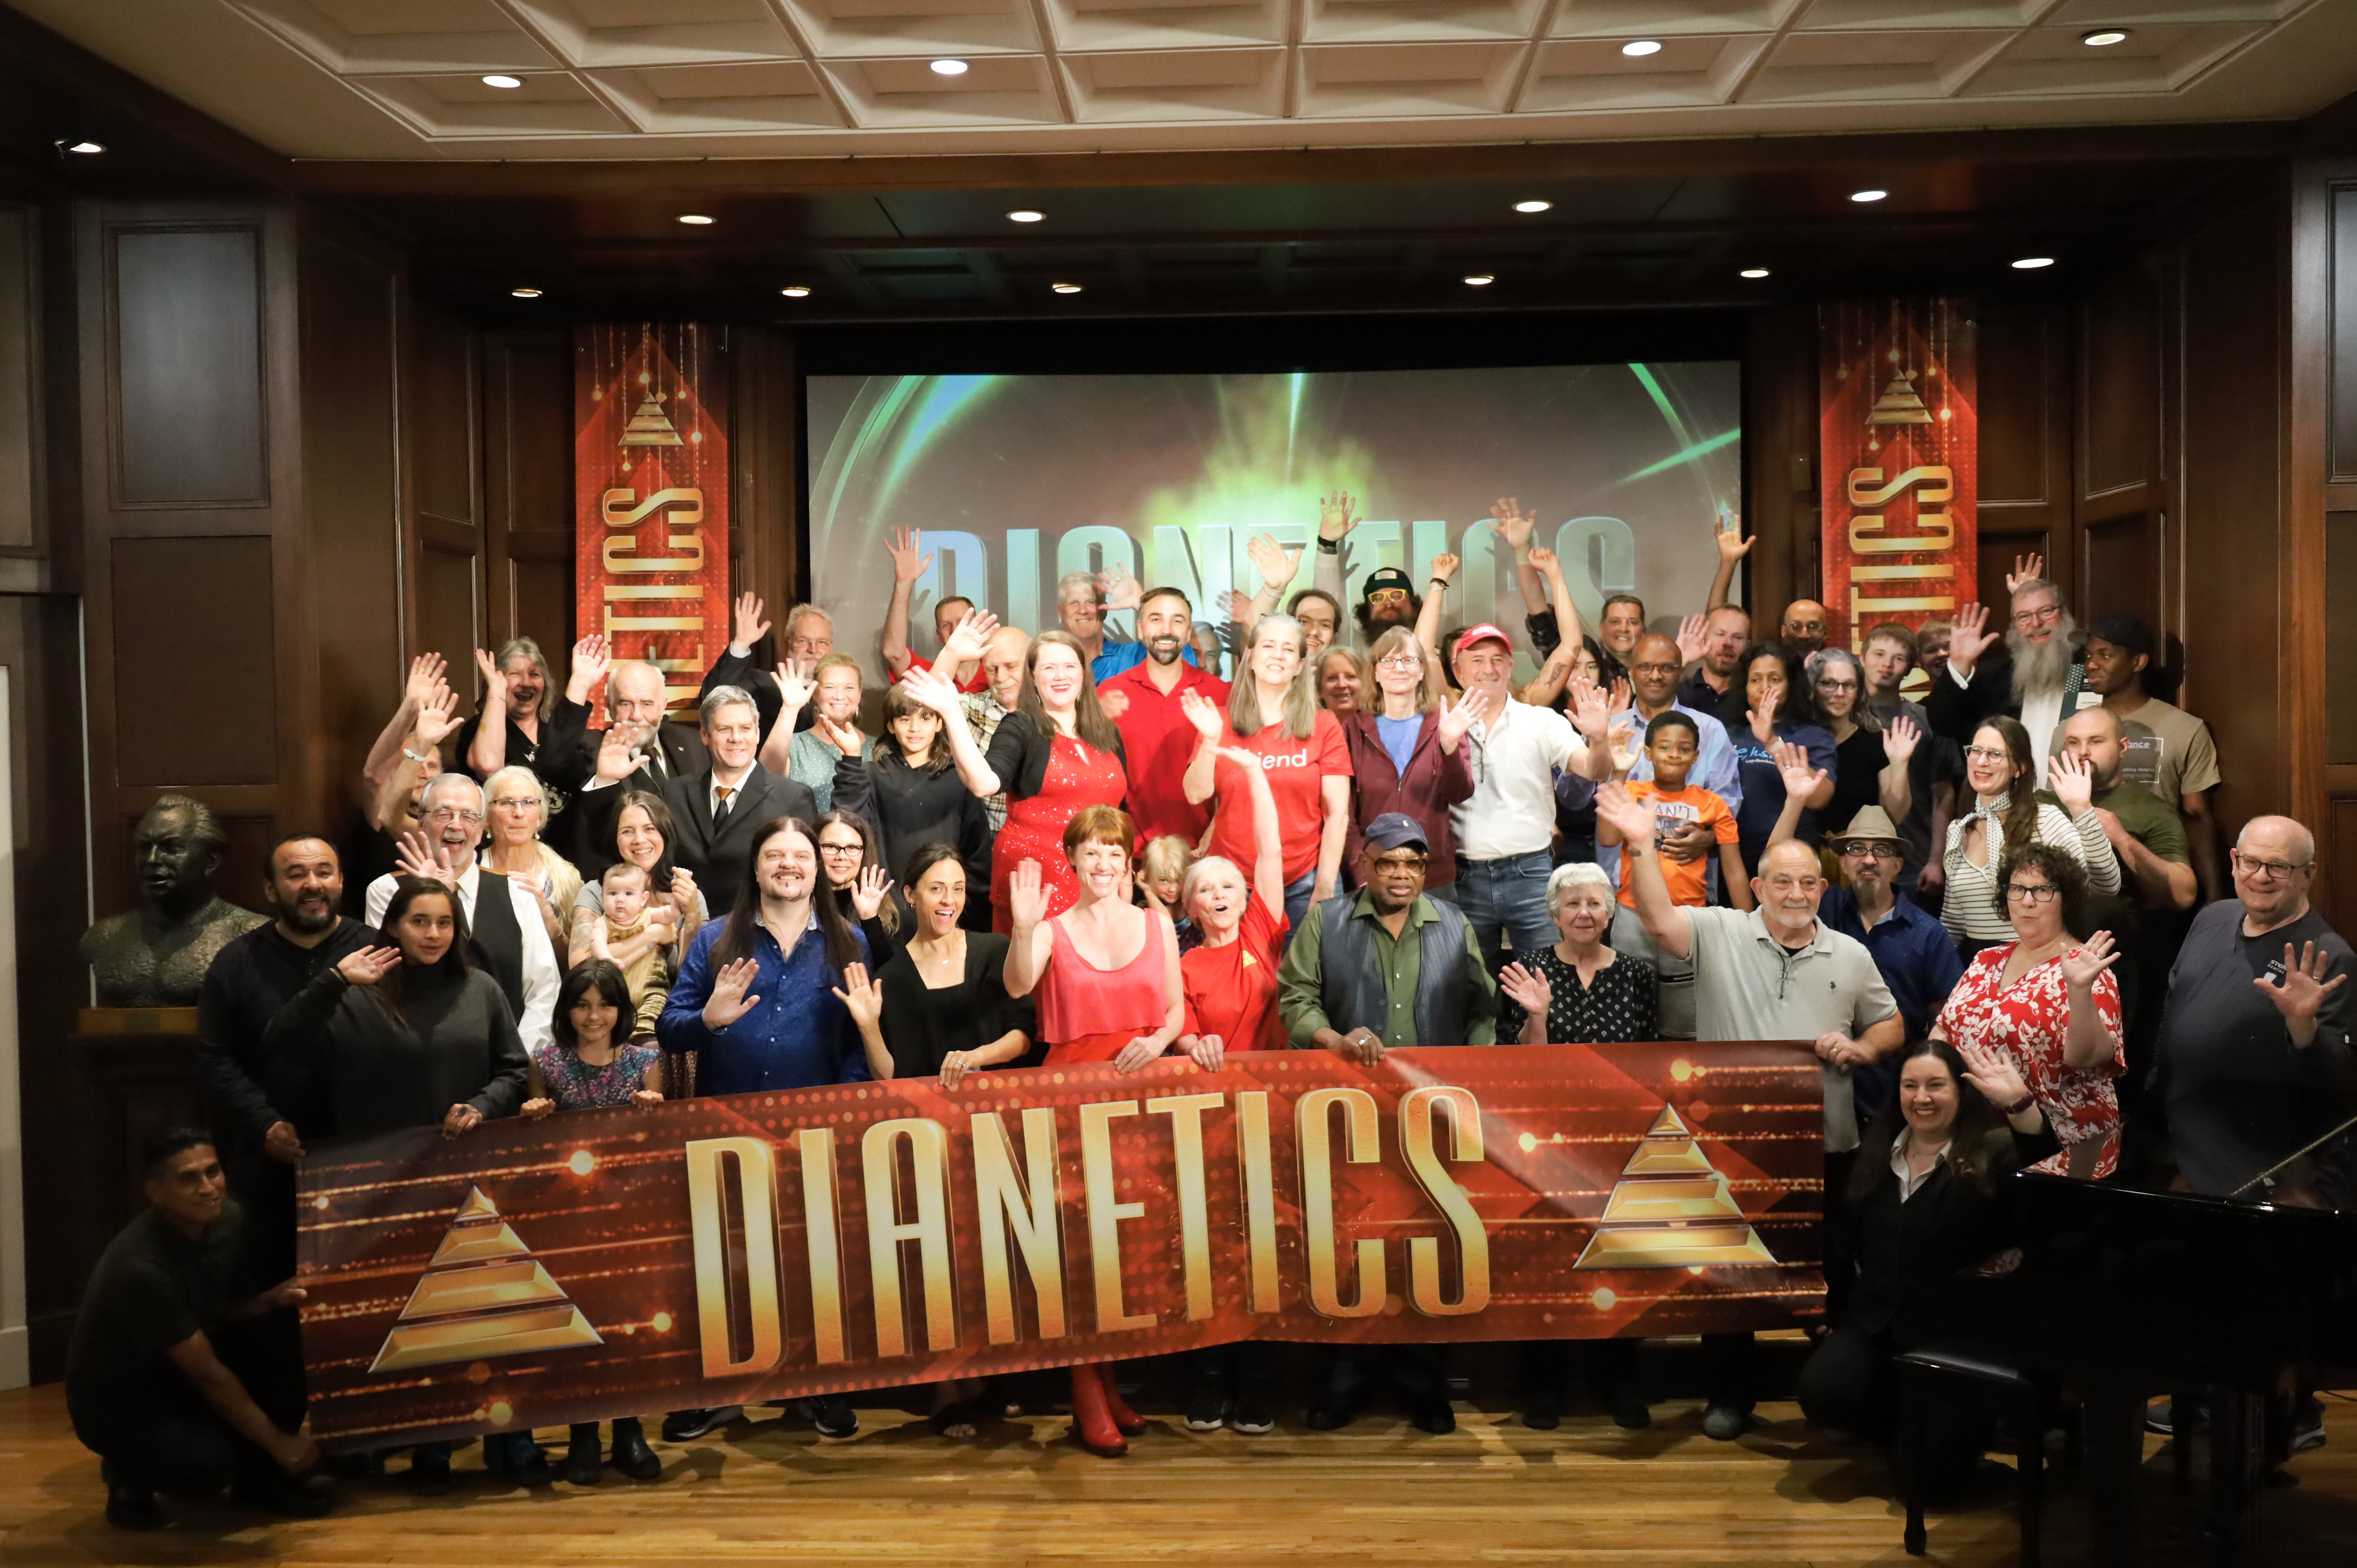 Church of Scientology Nashville Commemorates 74th Anniversary of Dianetics